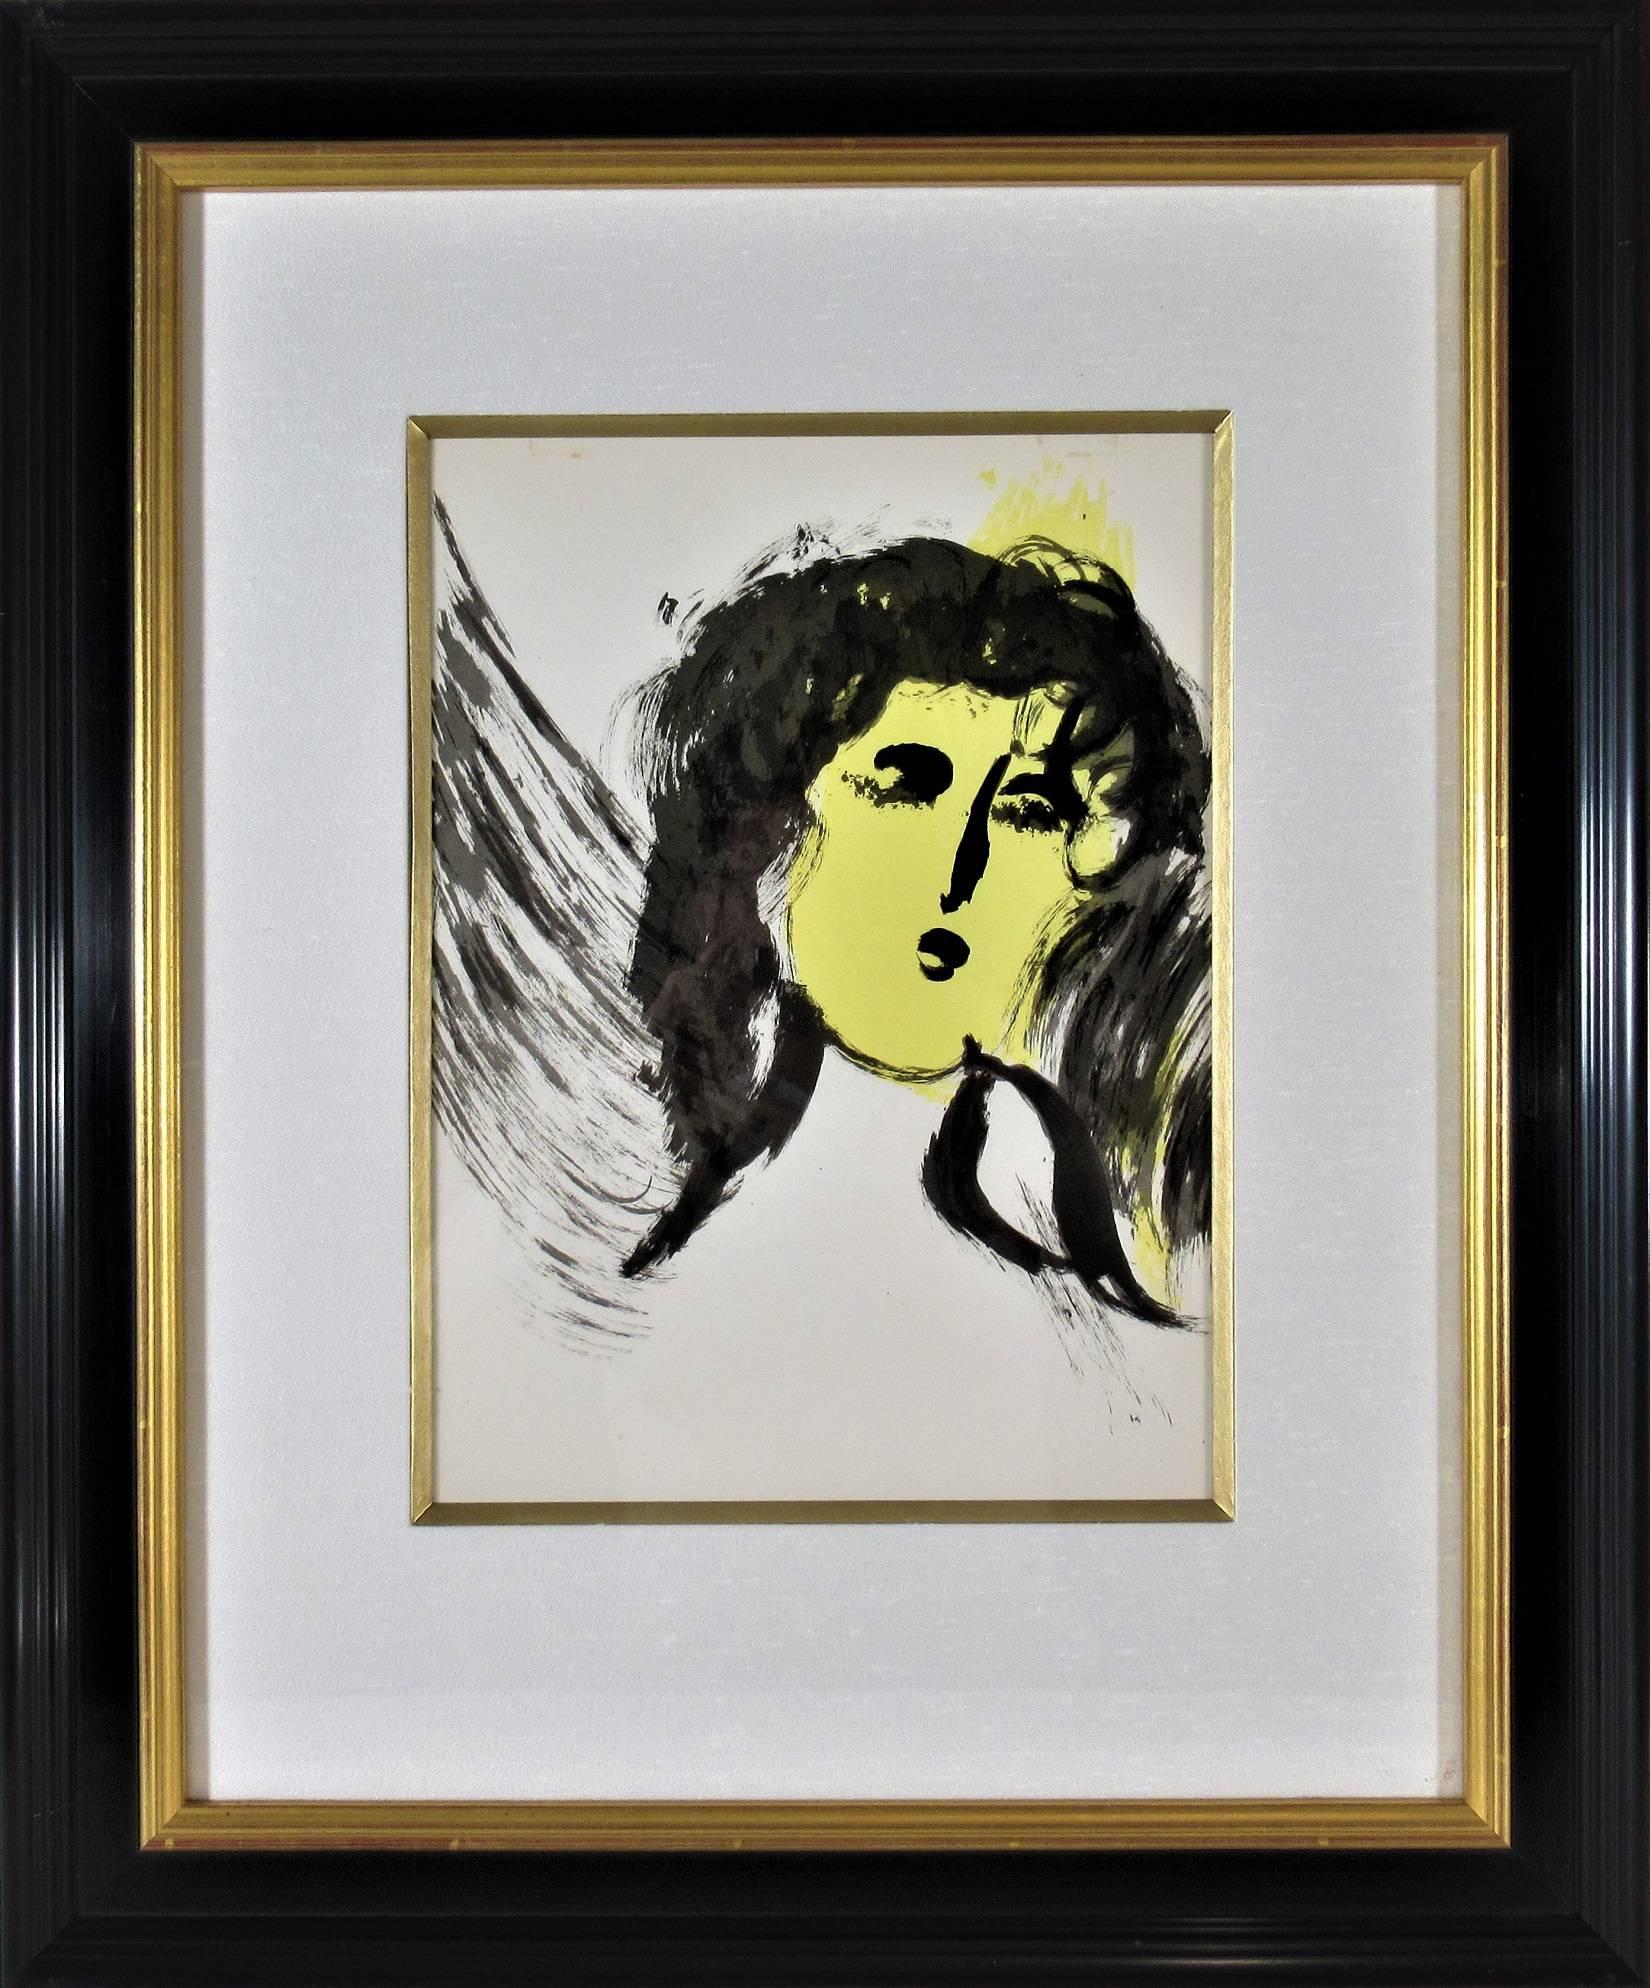 Marc Chagall Figurative Print - "The Angel" from "The Bible" original color lithograph.